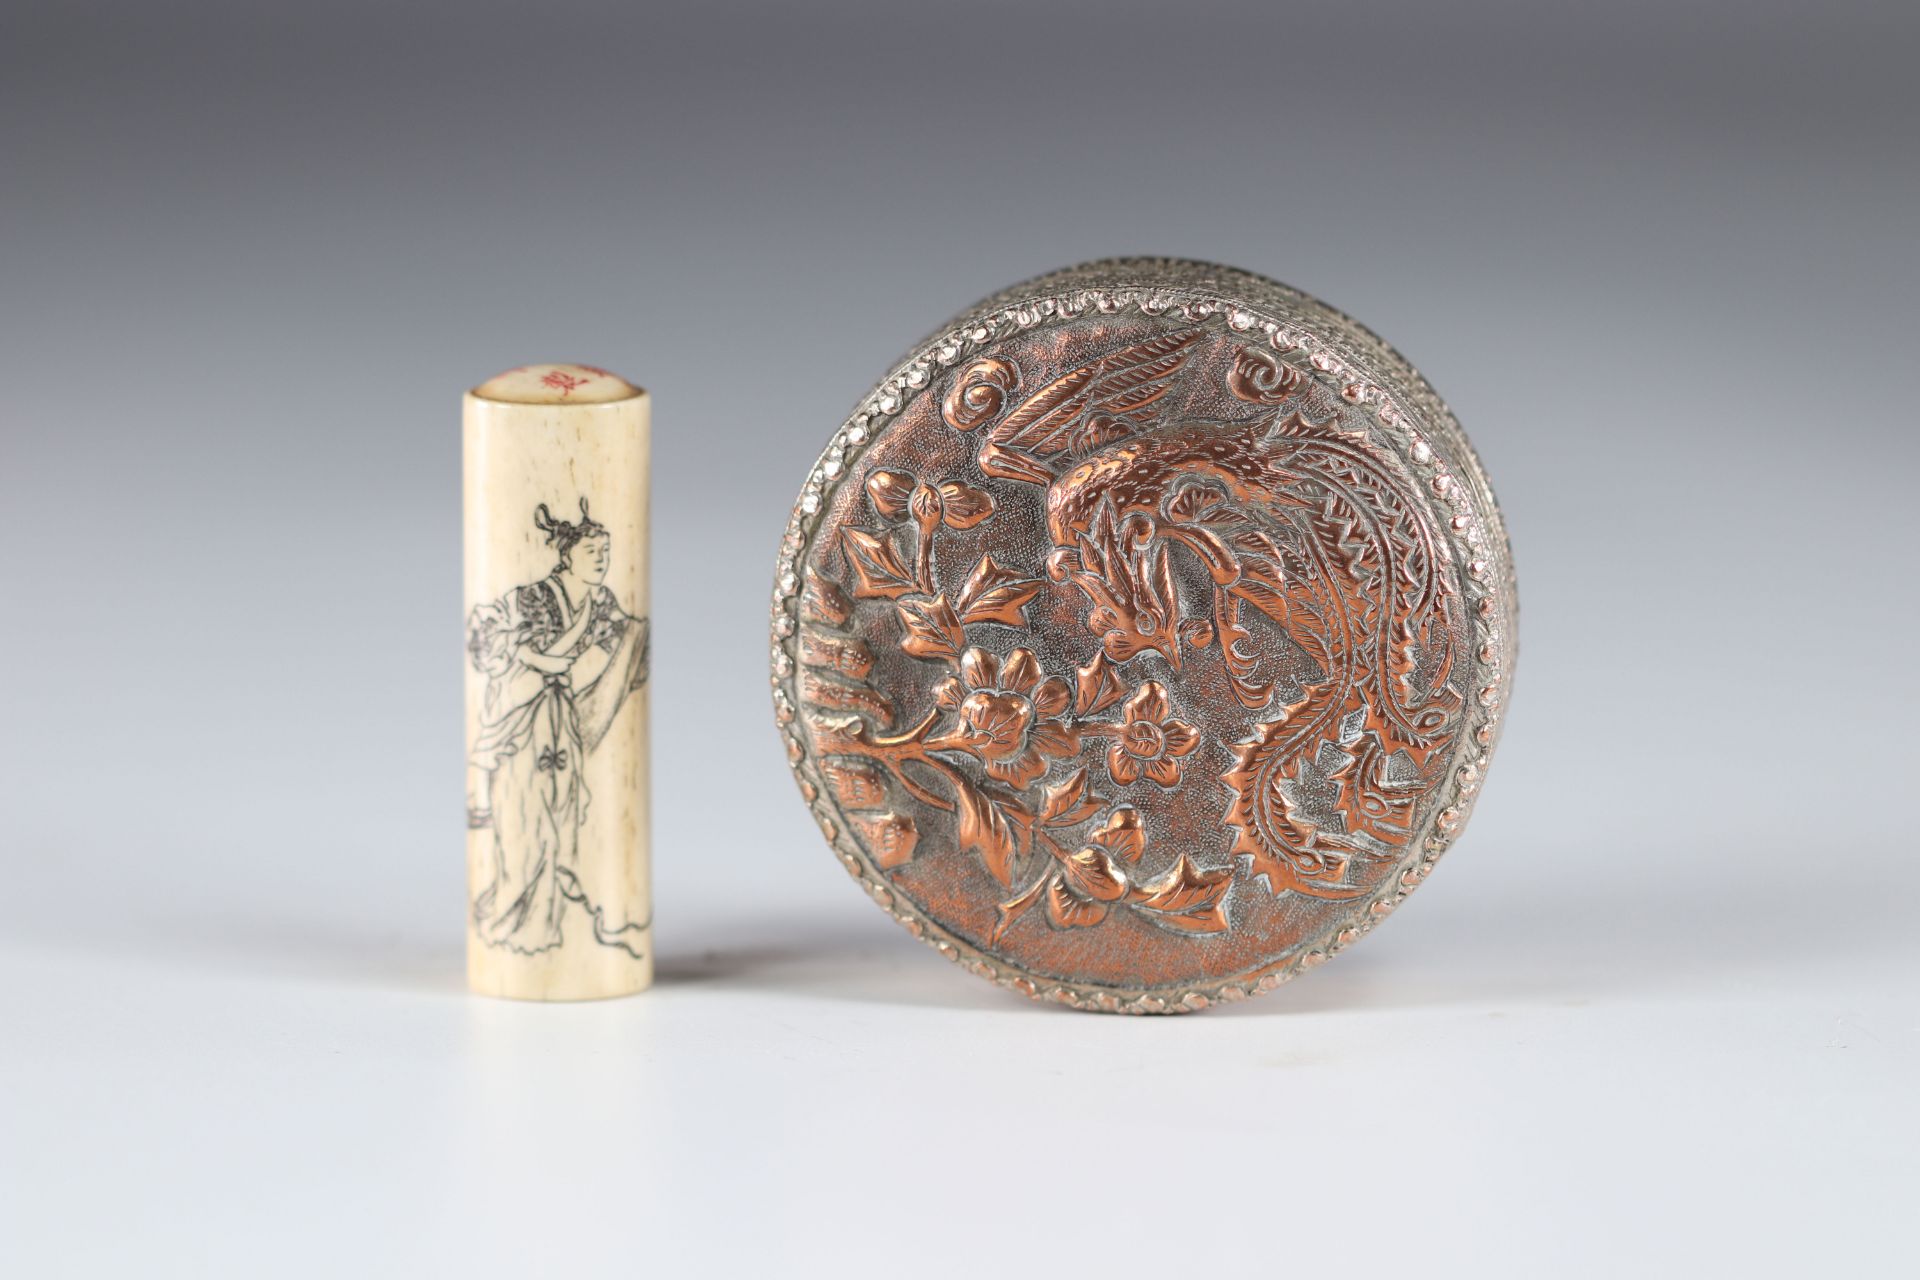 China seal with character decoration and inscription (attached a box decorated with a phoenix)